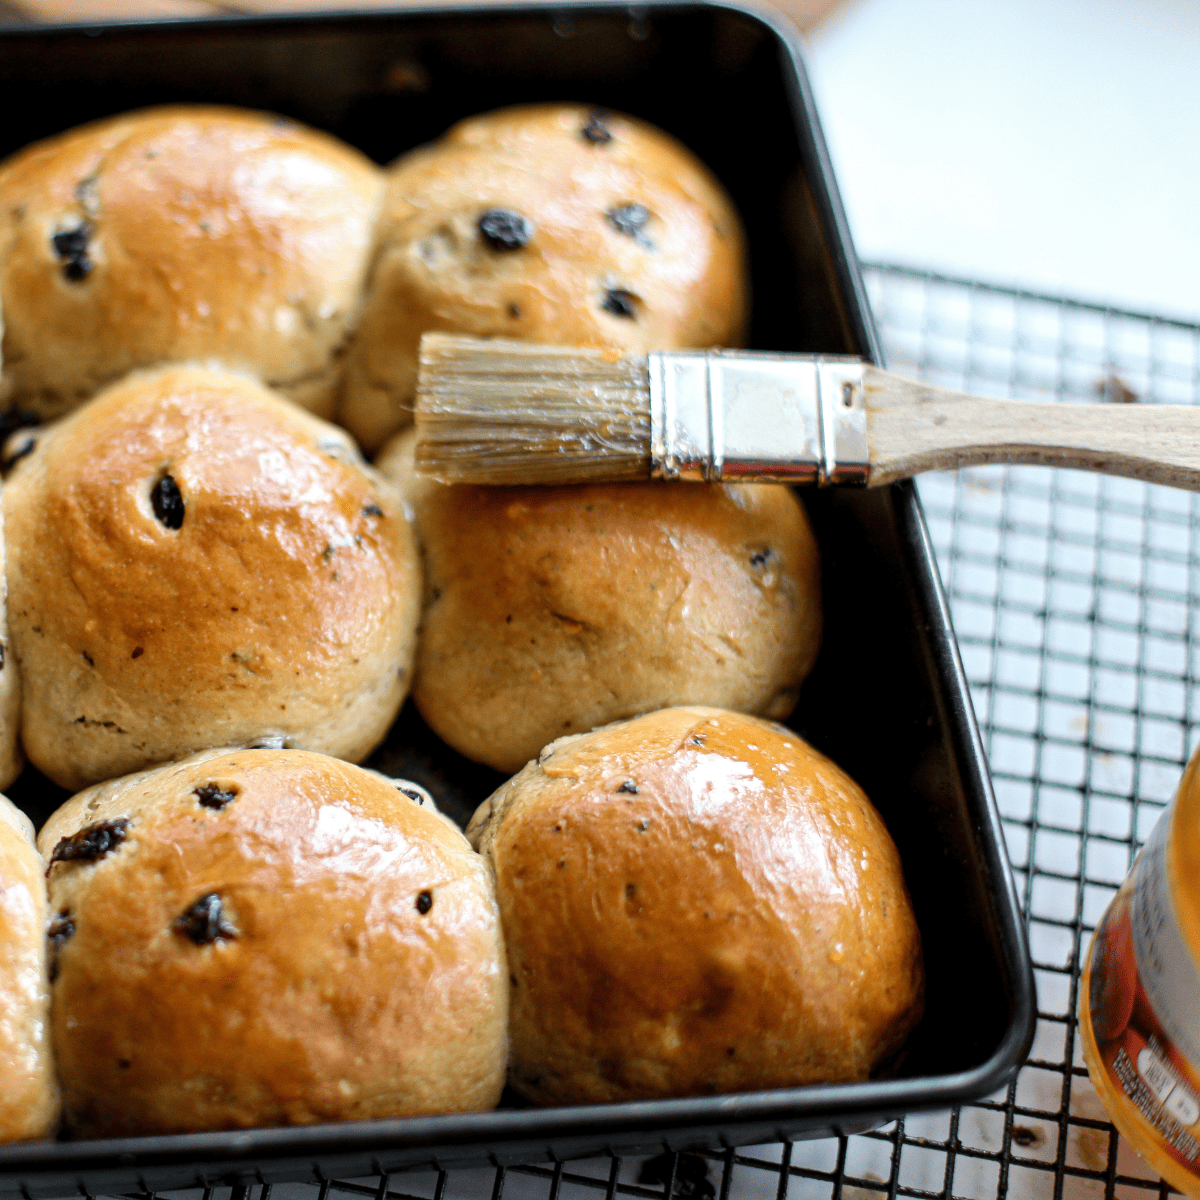 Vegan Currant Buns Recipe – An old-fashioned favourite